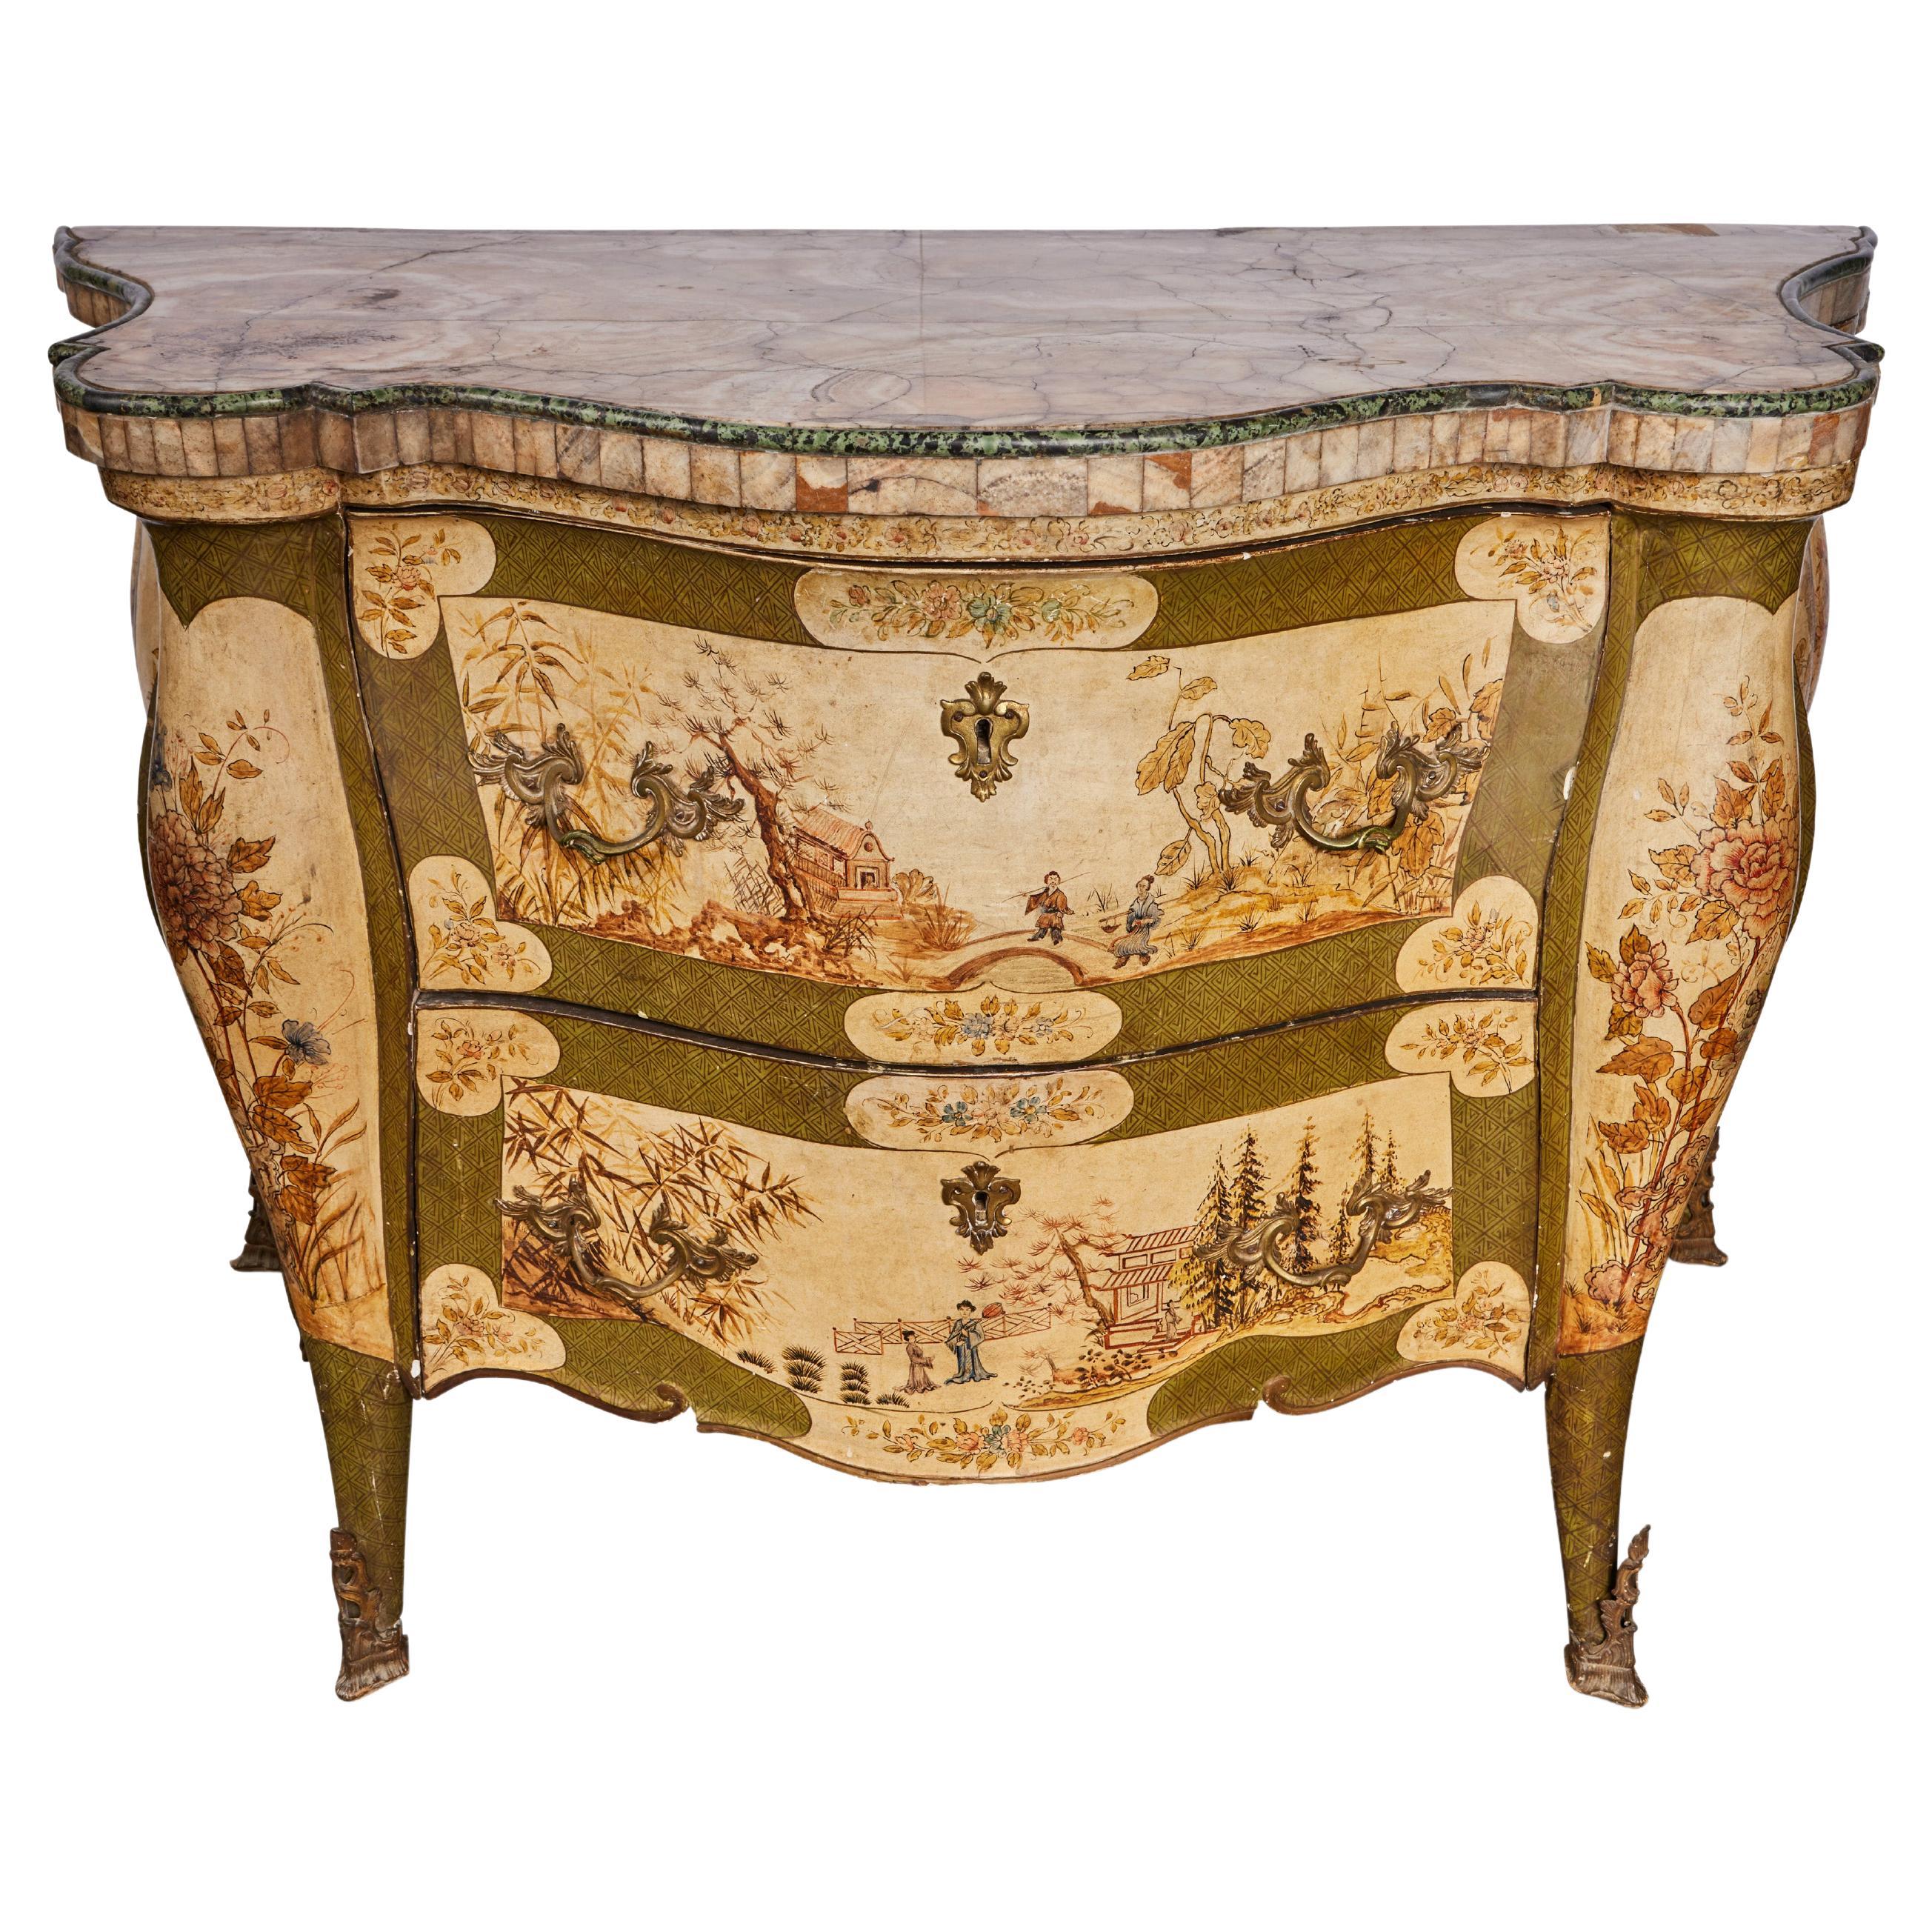 Exceptional, Period Chinoiserie Commode For Sale